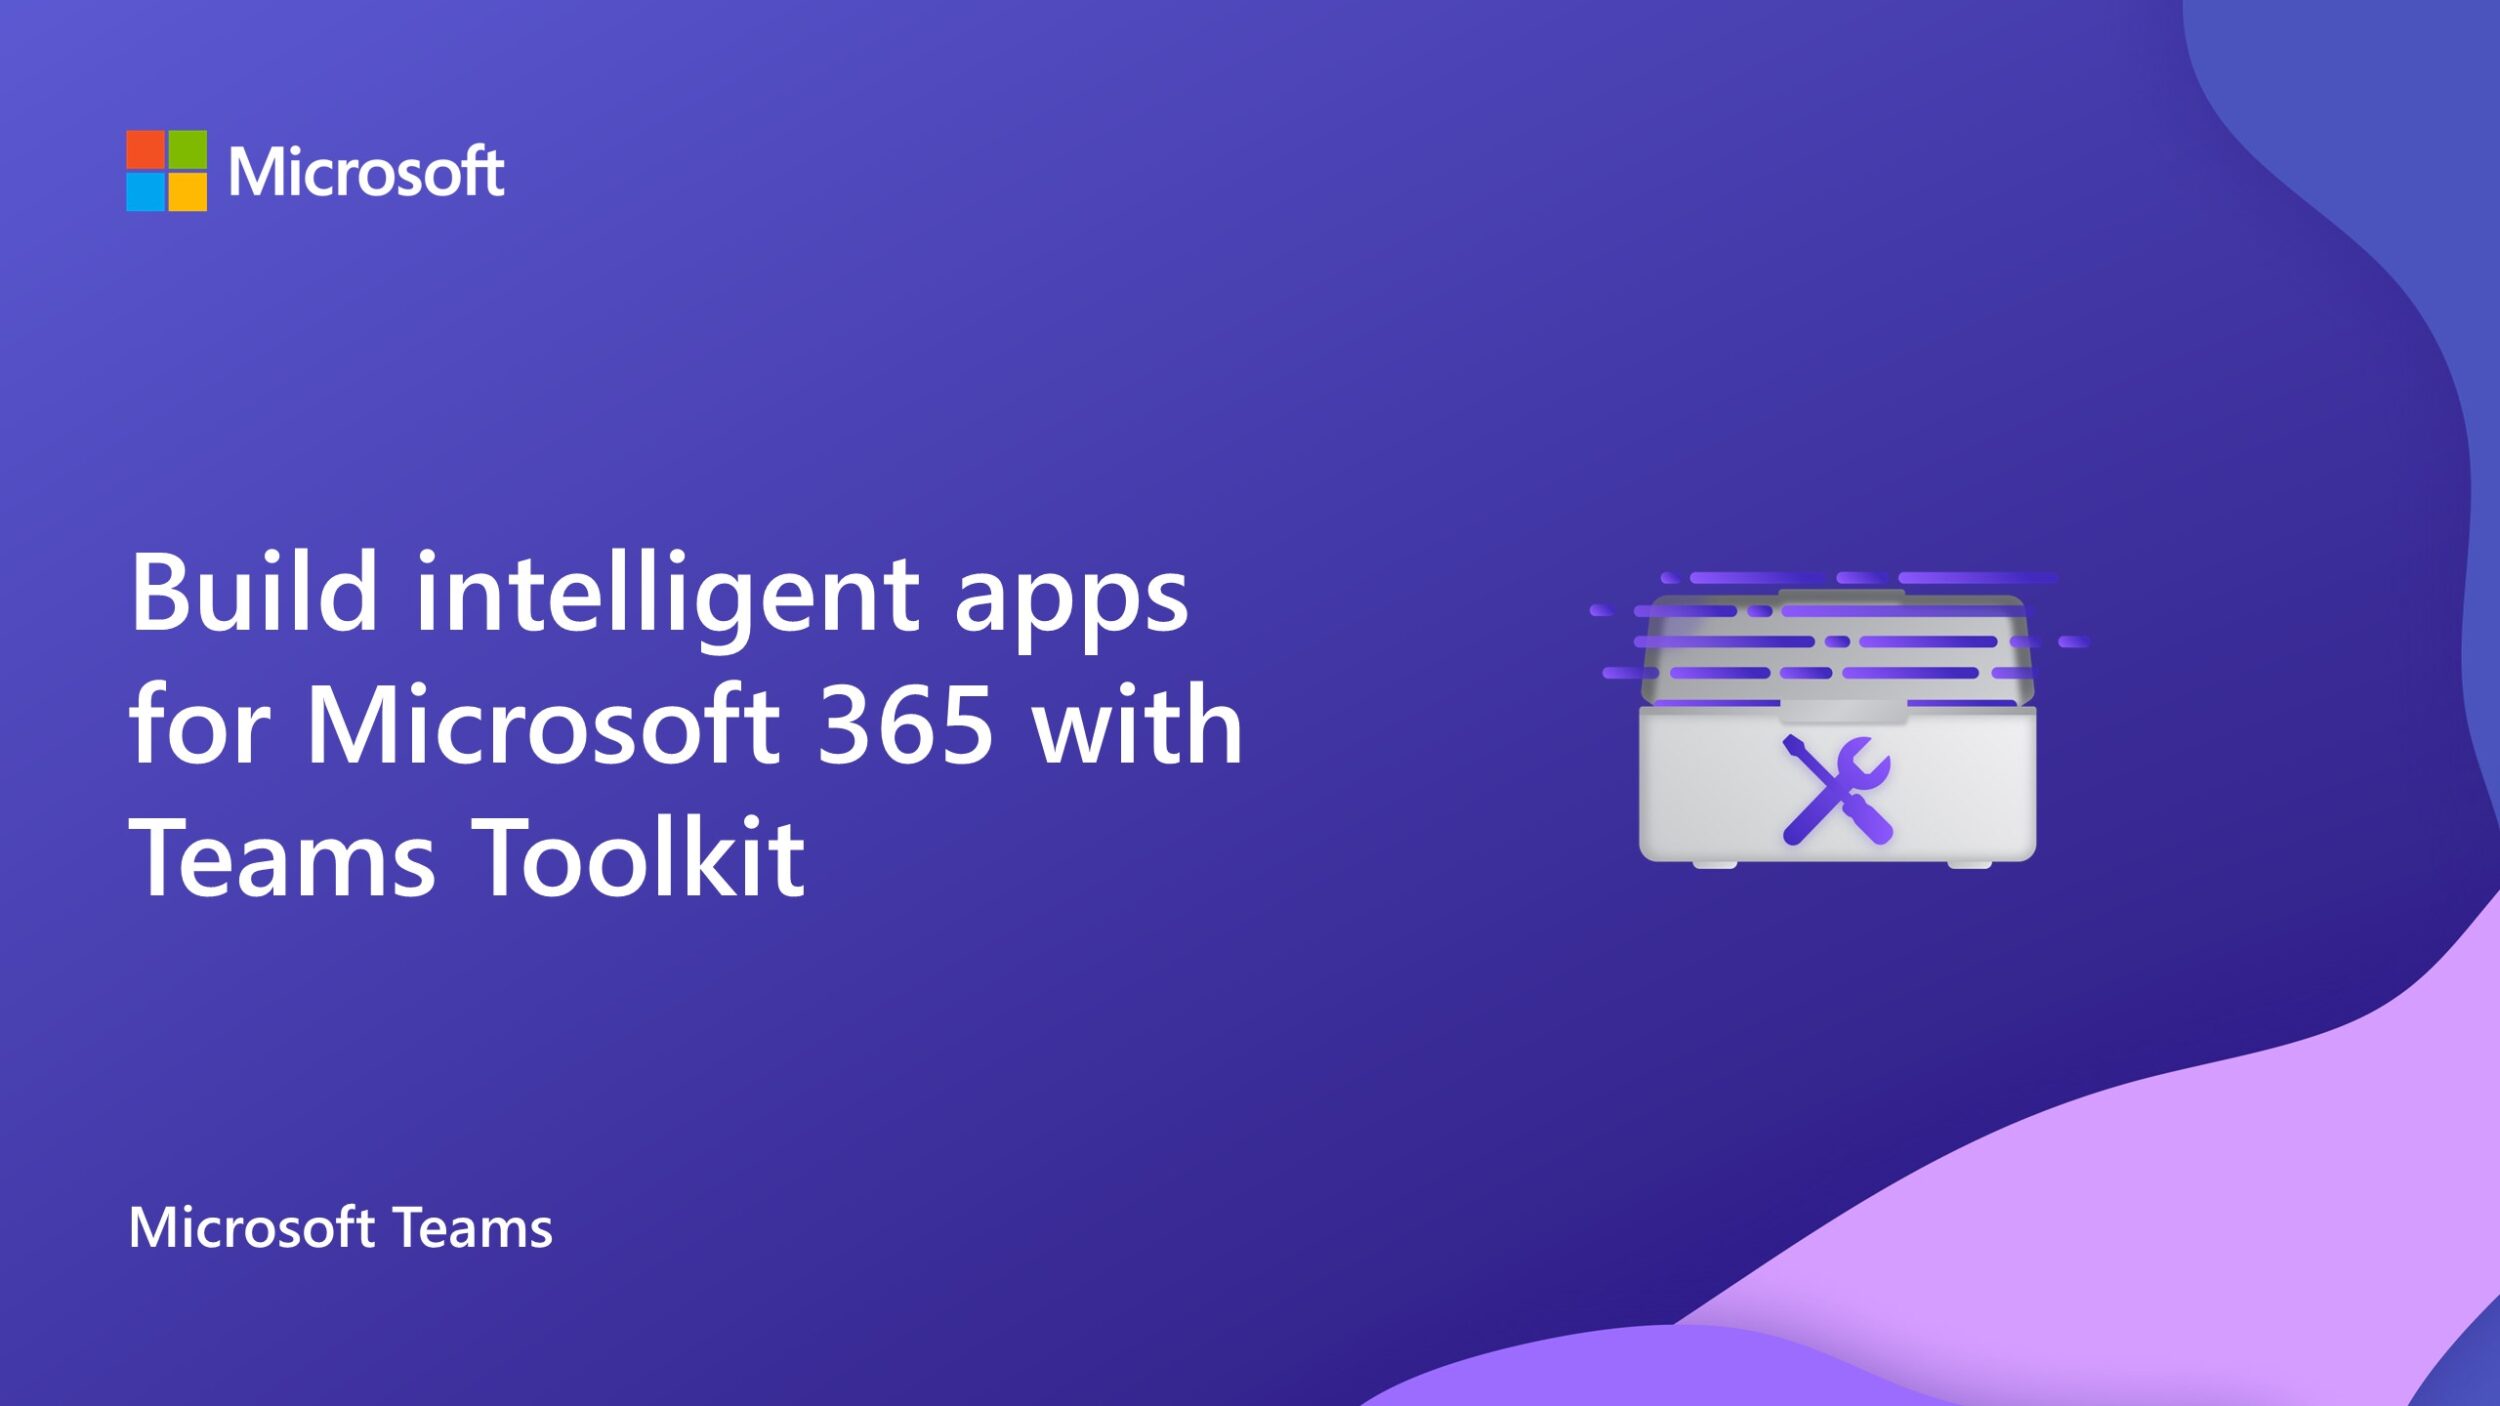 Build intelligent apps for Microsoft 365 with Teams Toolkit